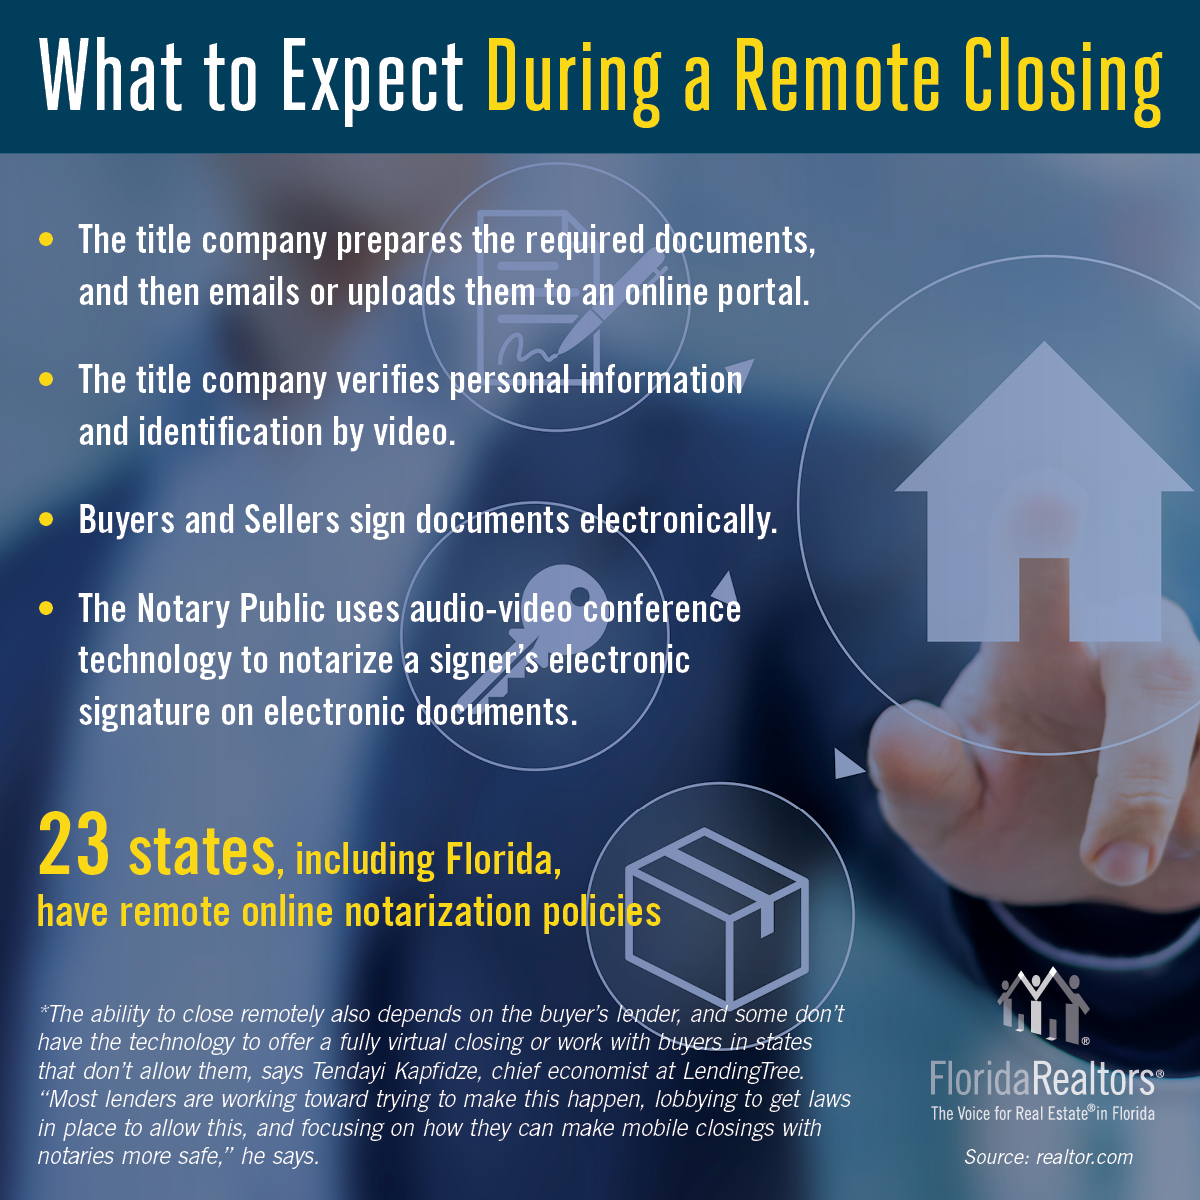 What to Expect During a Remote Closing